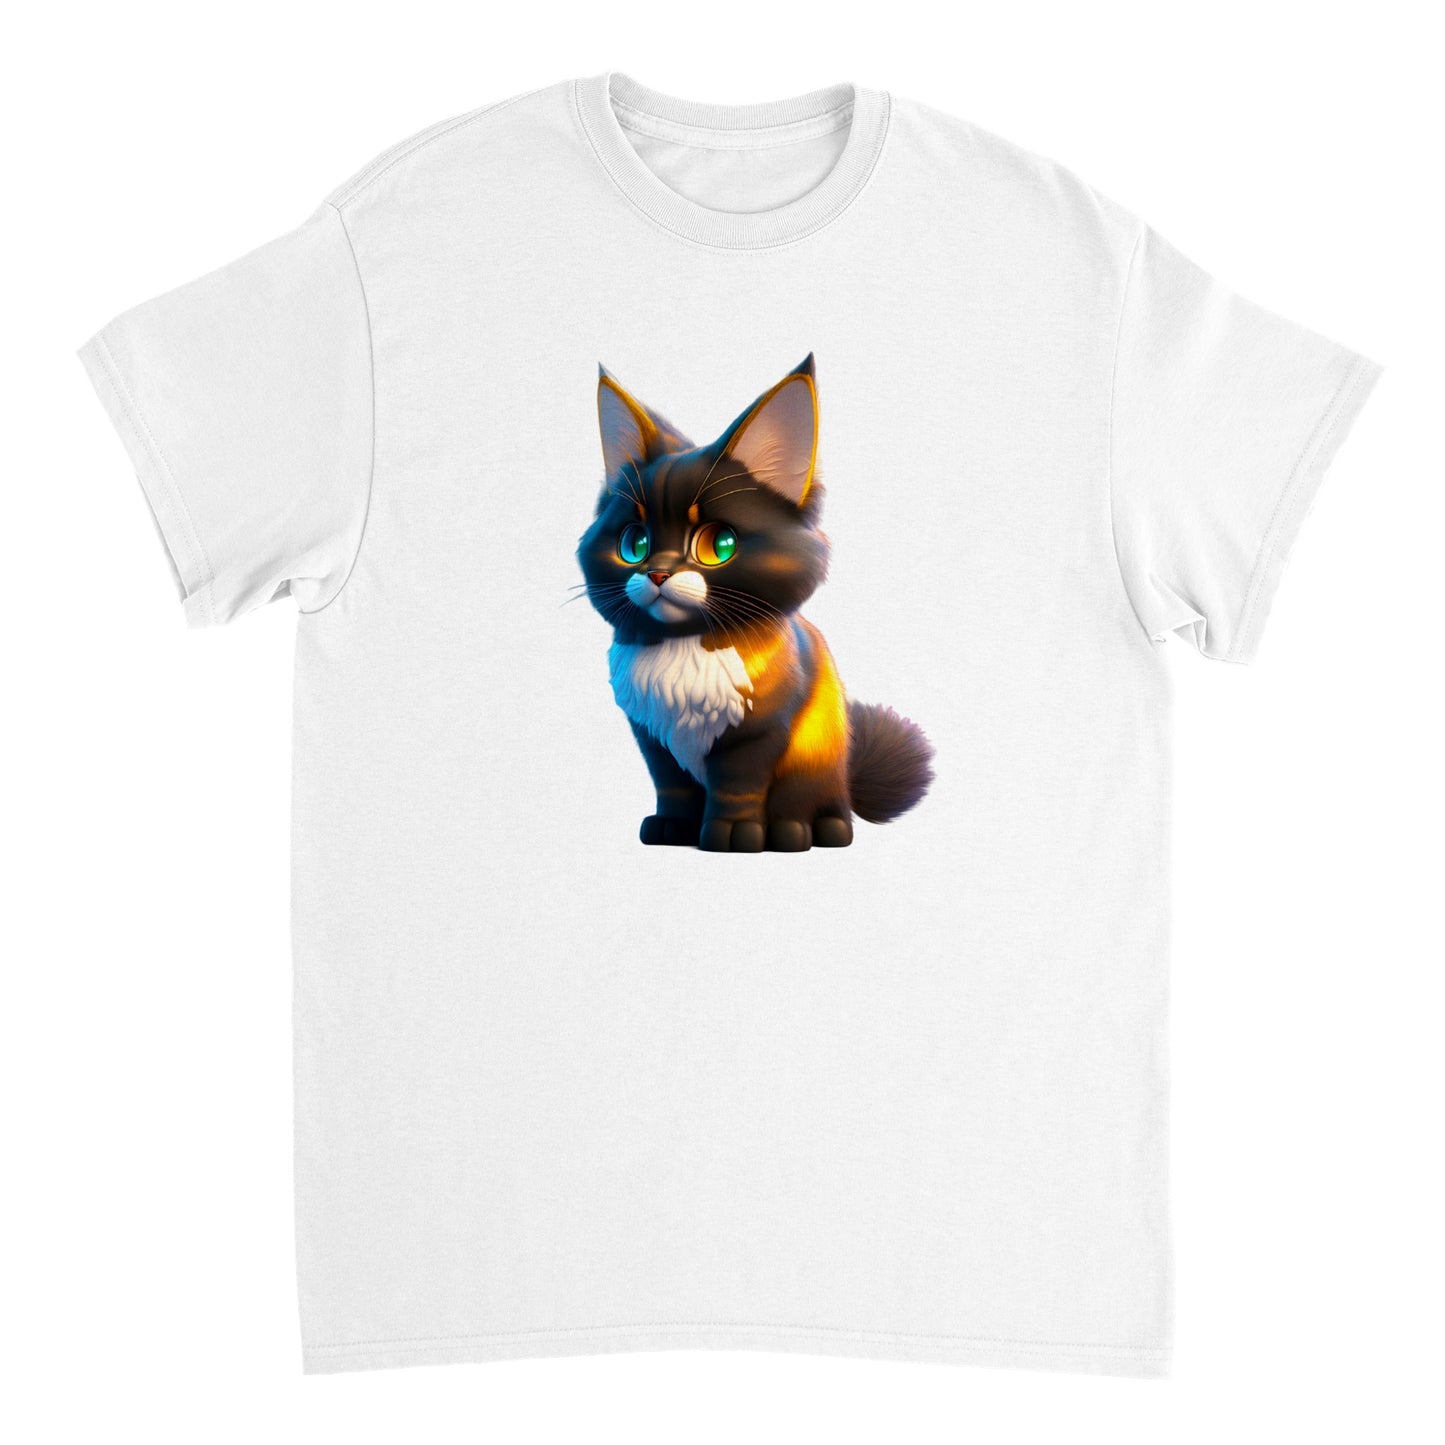 Adorable, Cool, Cute Cats and Kittens Toy - Heavyweight Unisex Crewneck T-shirt 3